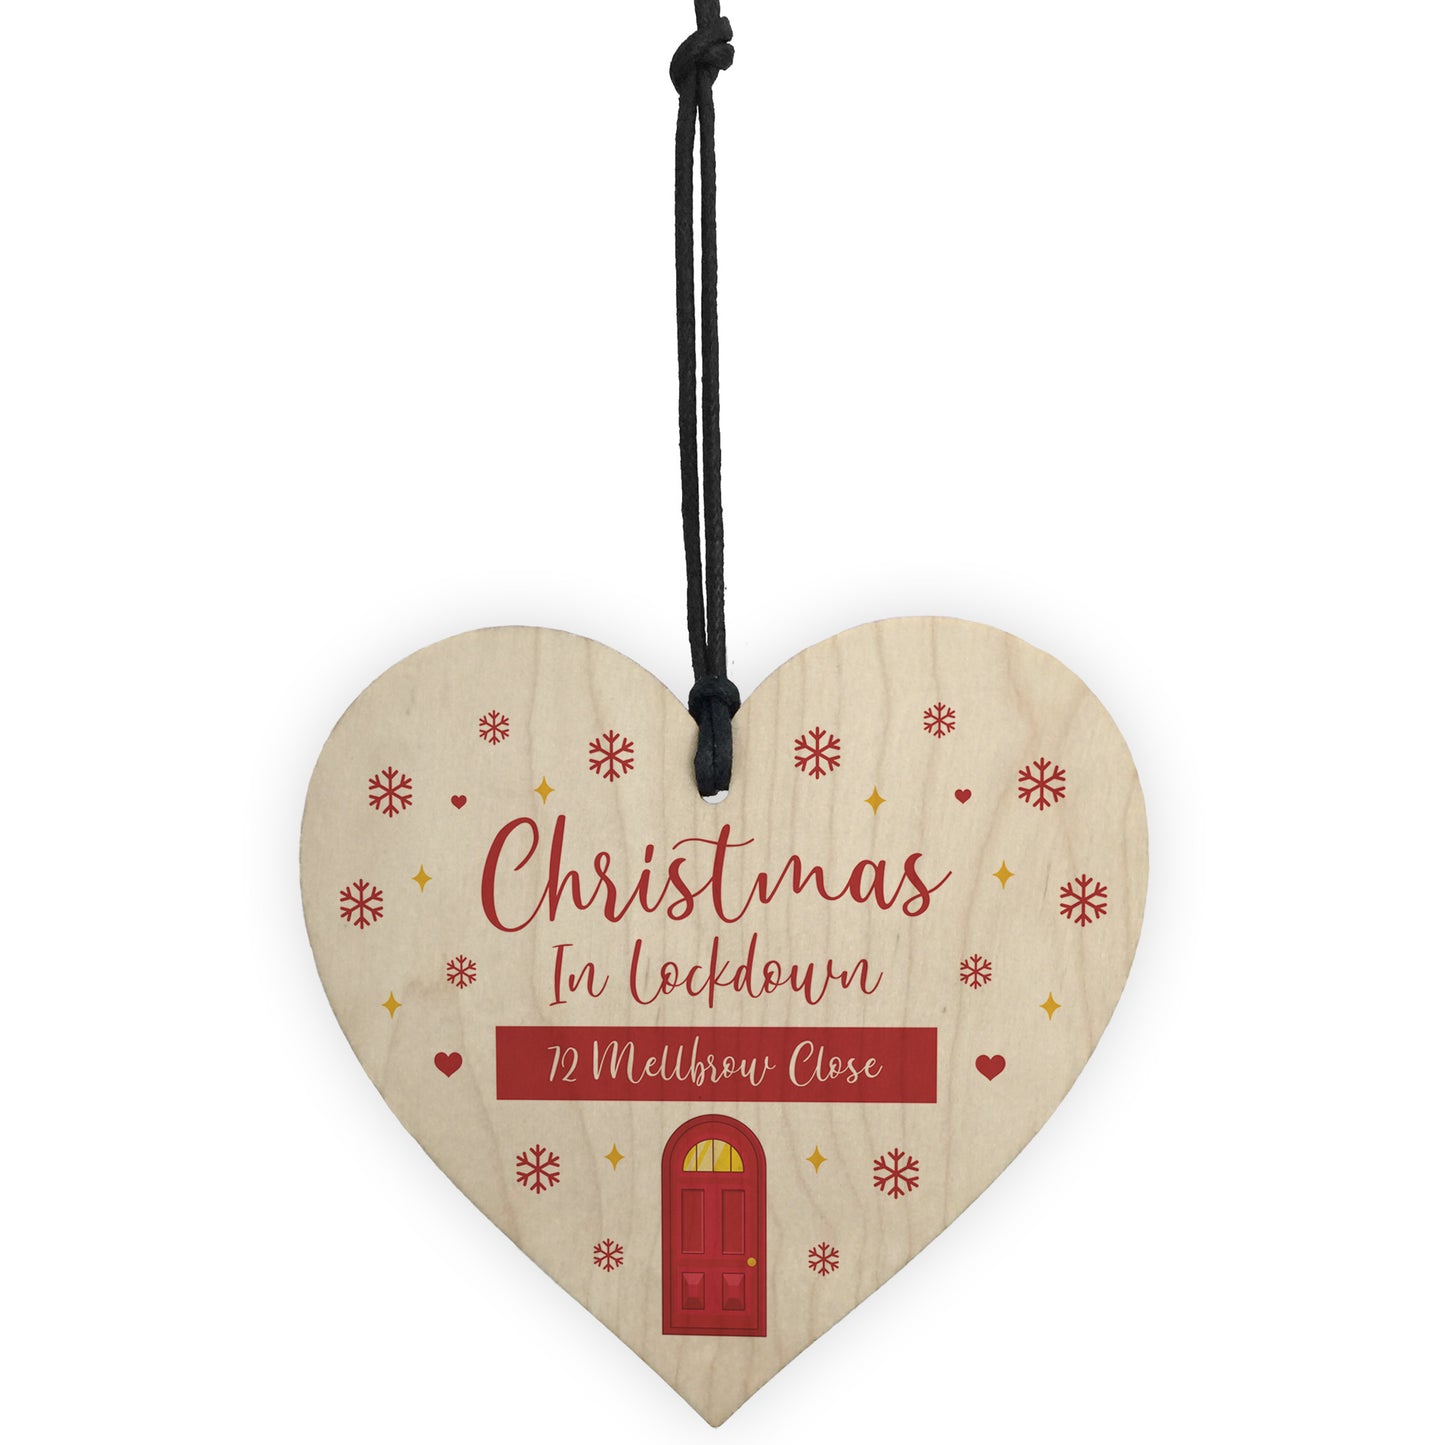 New Home Gift Wood Bauble Christmas Tree Decoration Lockdown